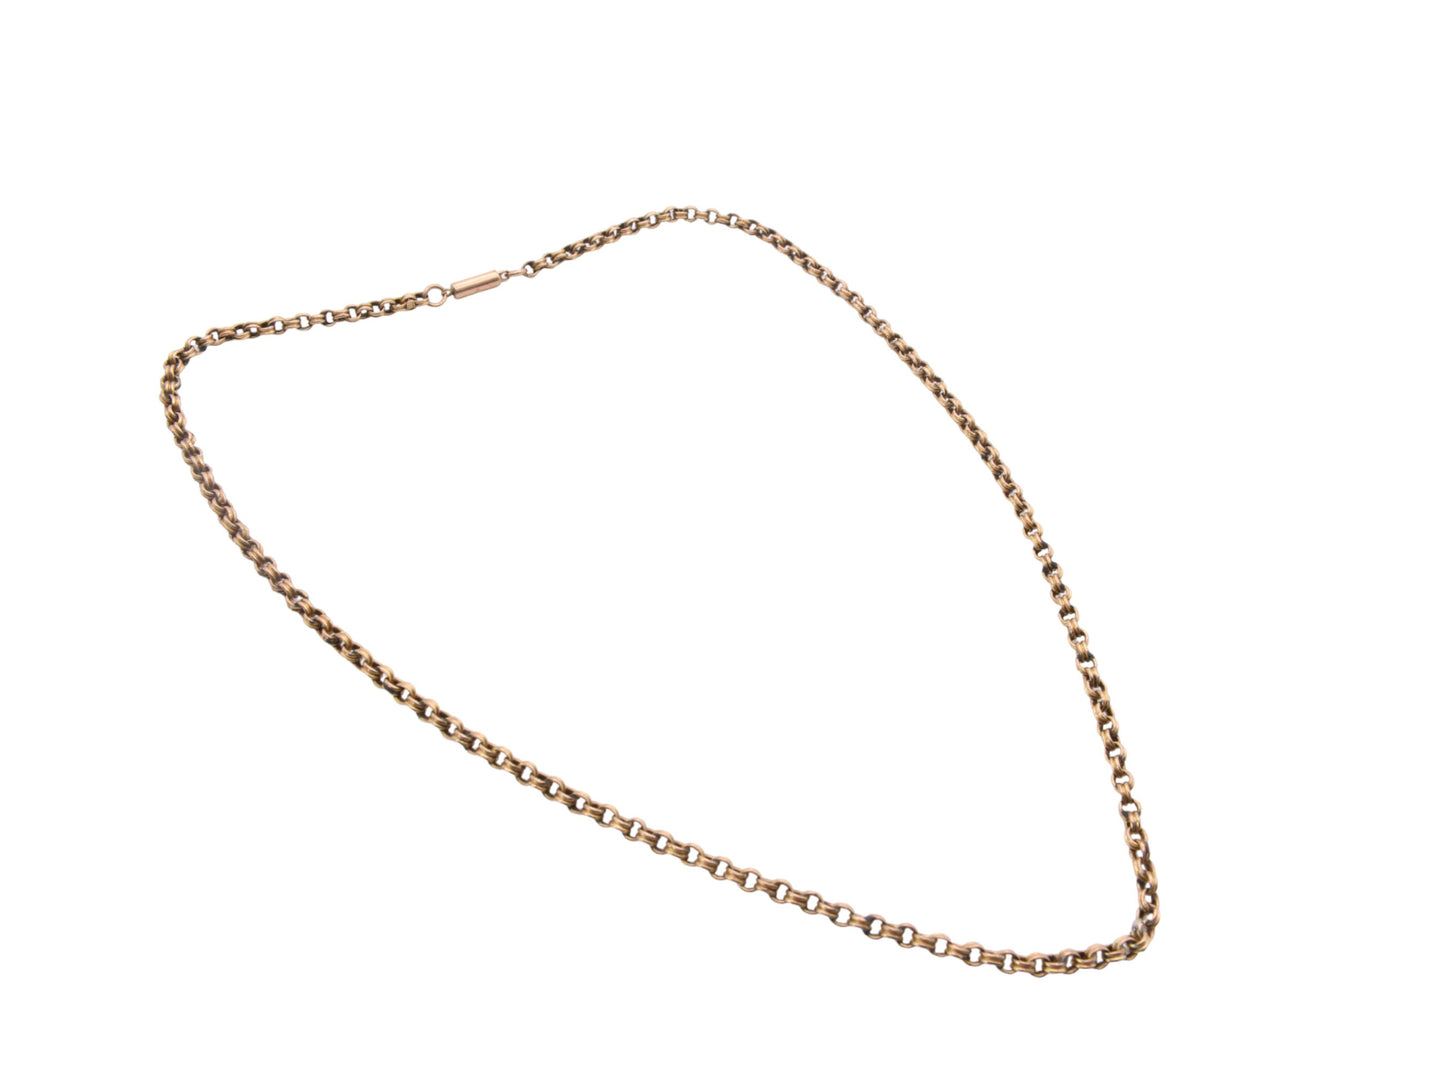 Antique 9ct Gold Rolo Ribbed Belcher Necklace, 17"